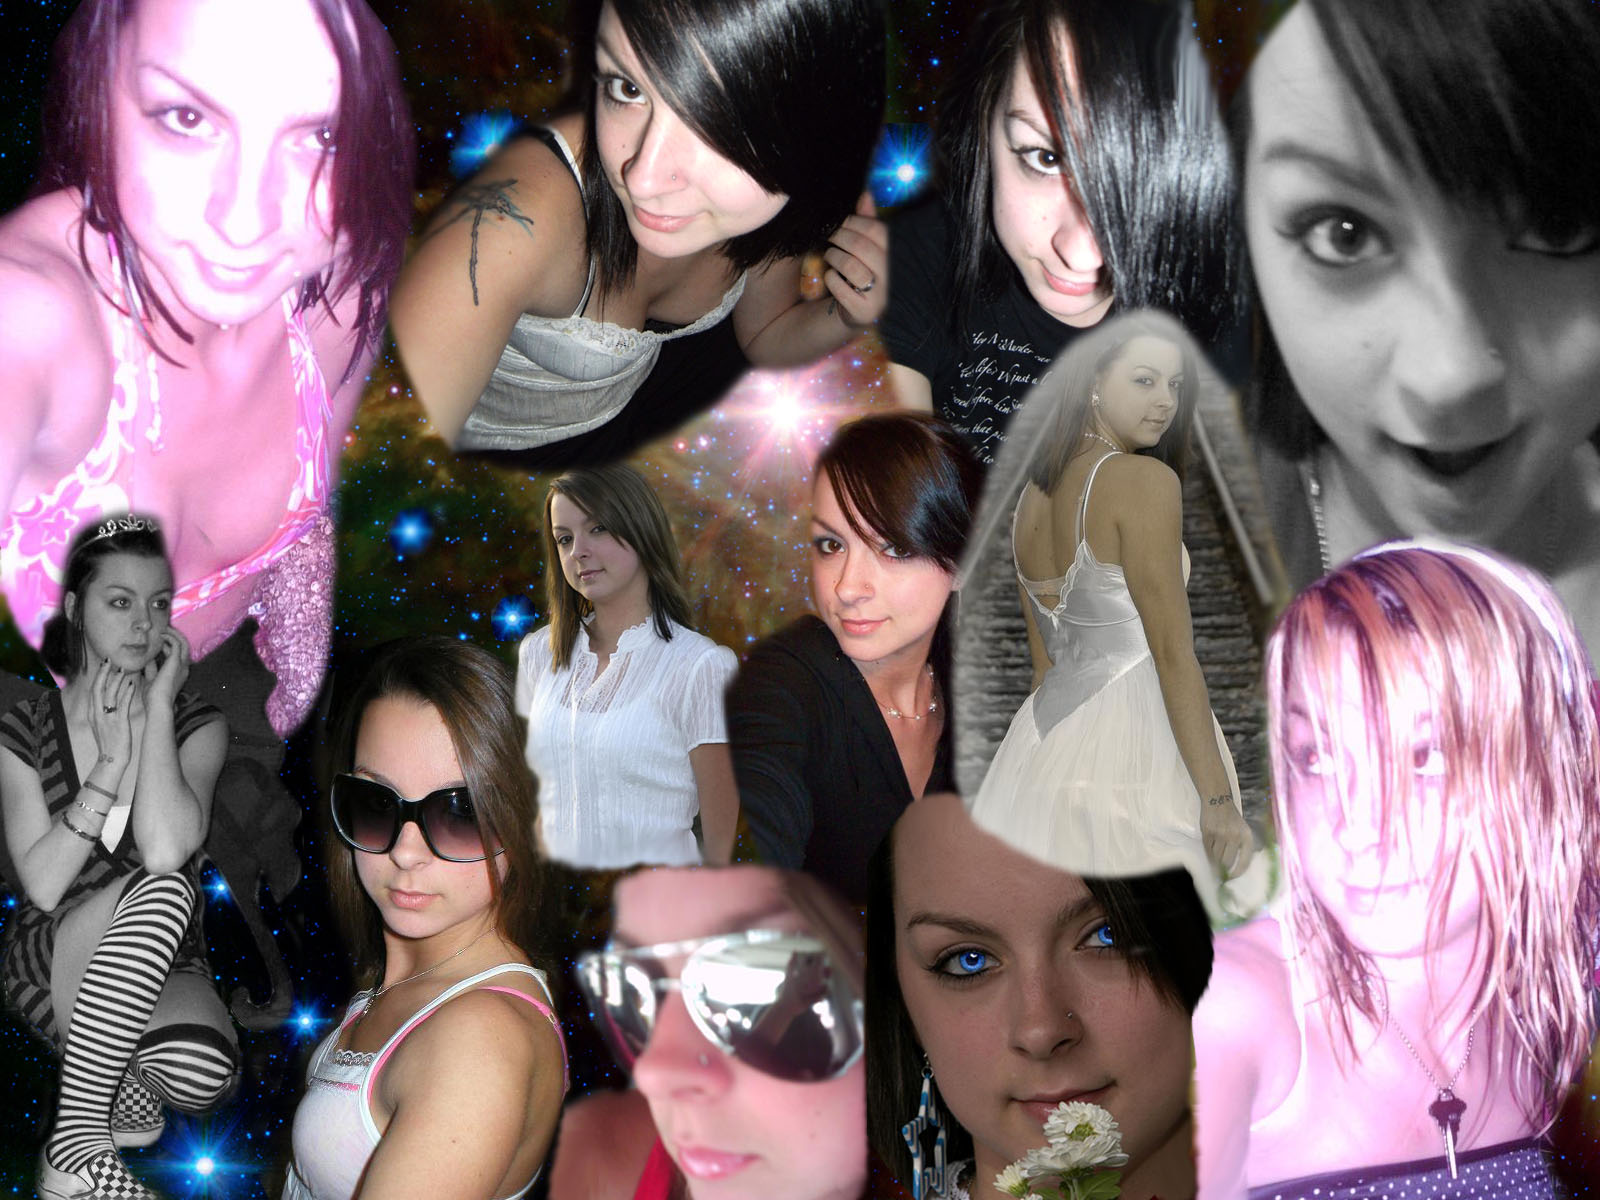 Very beautiful girl with a collage from myspace, tell me what u think.